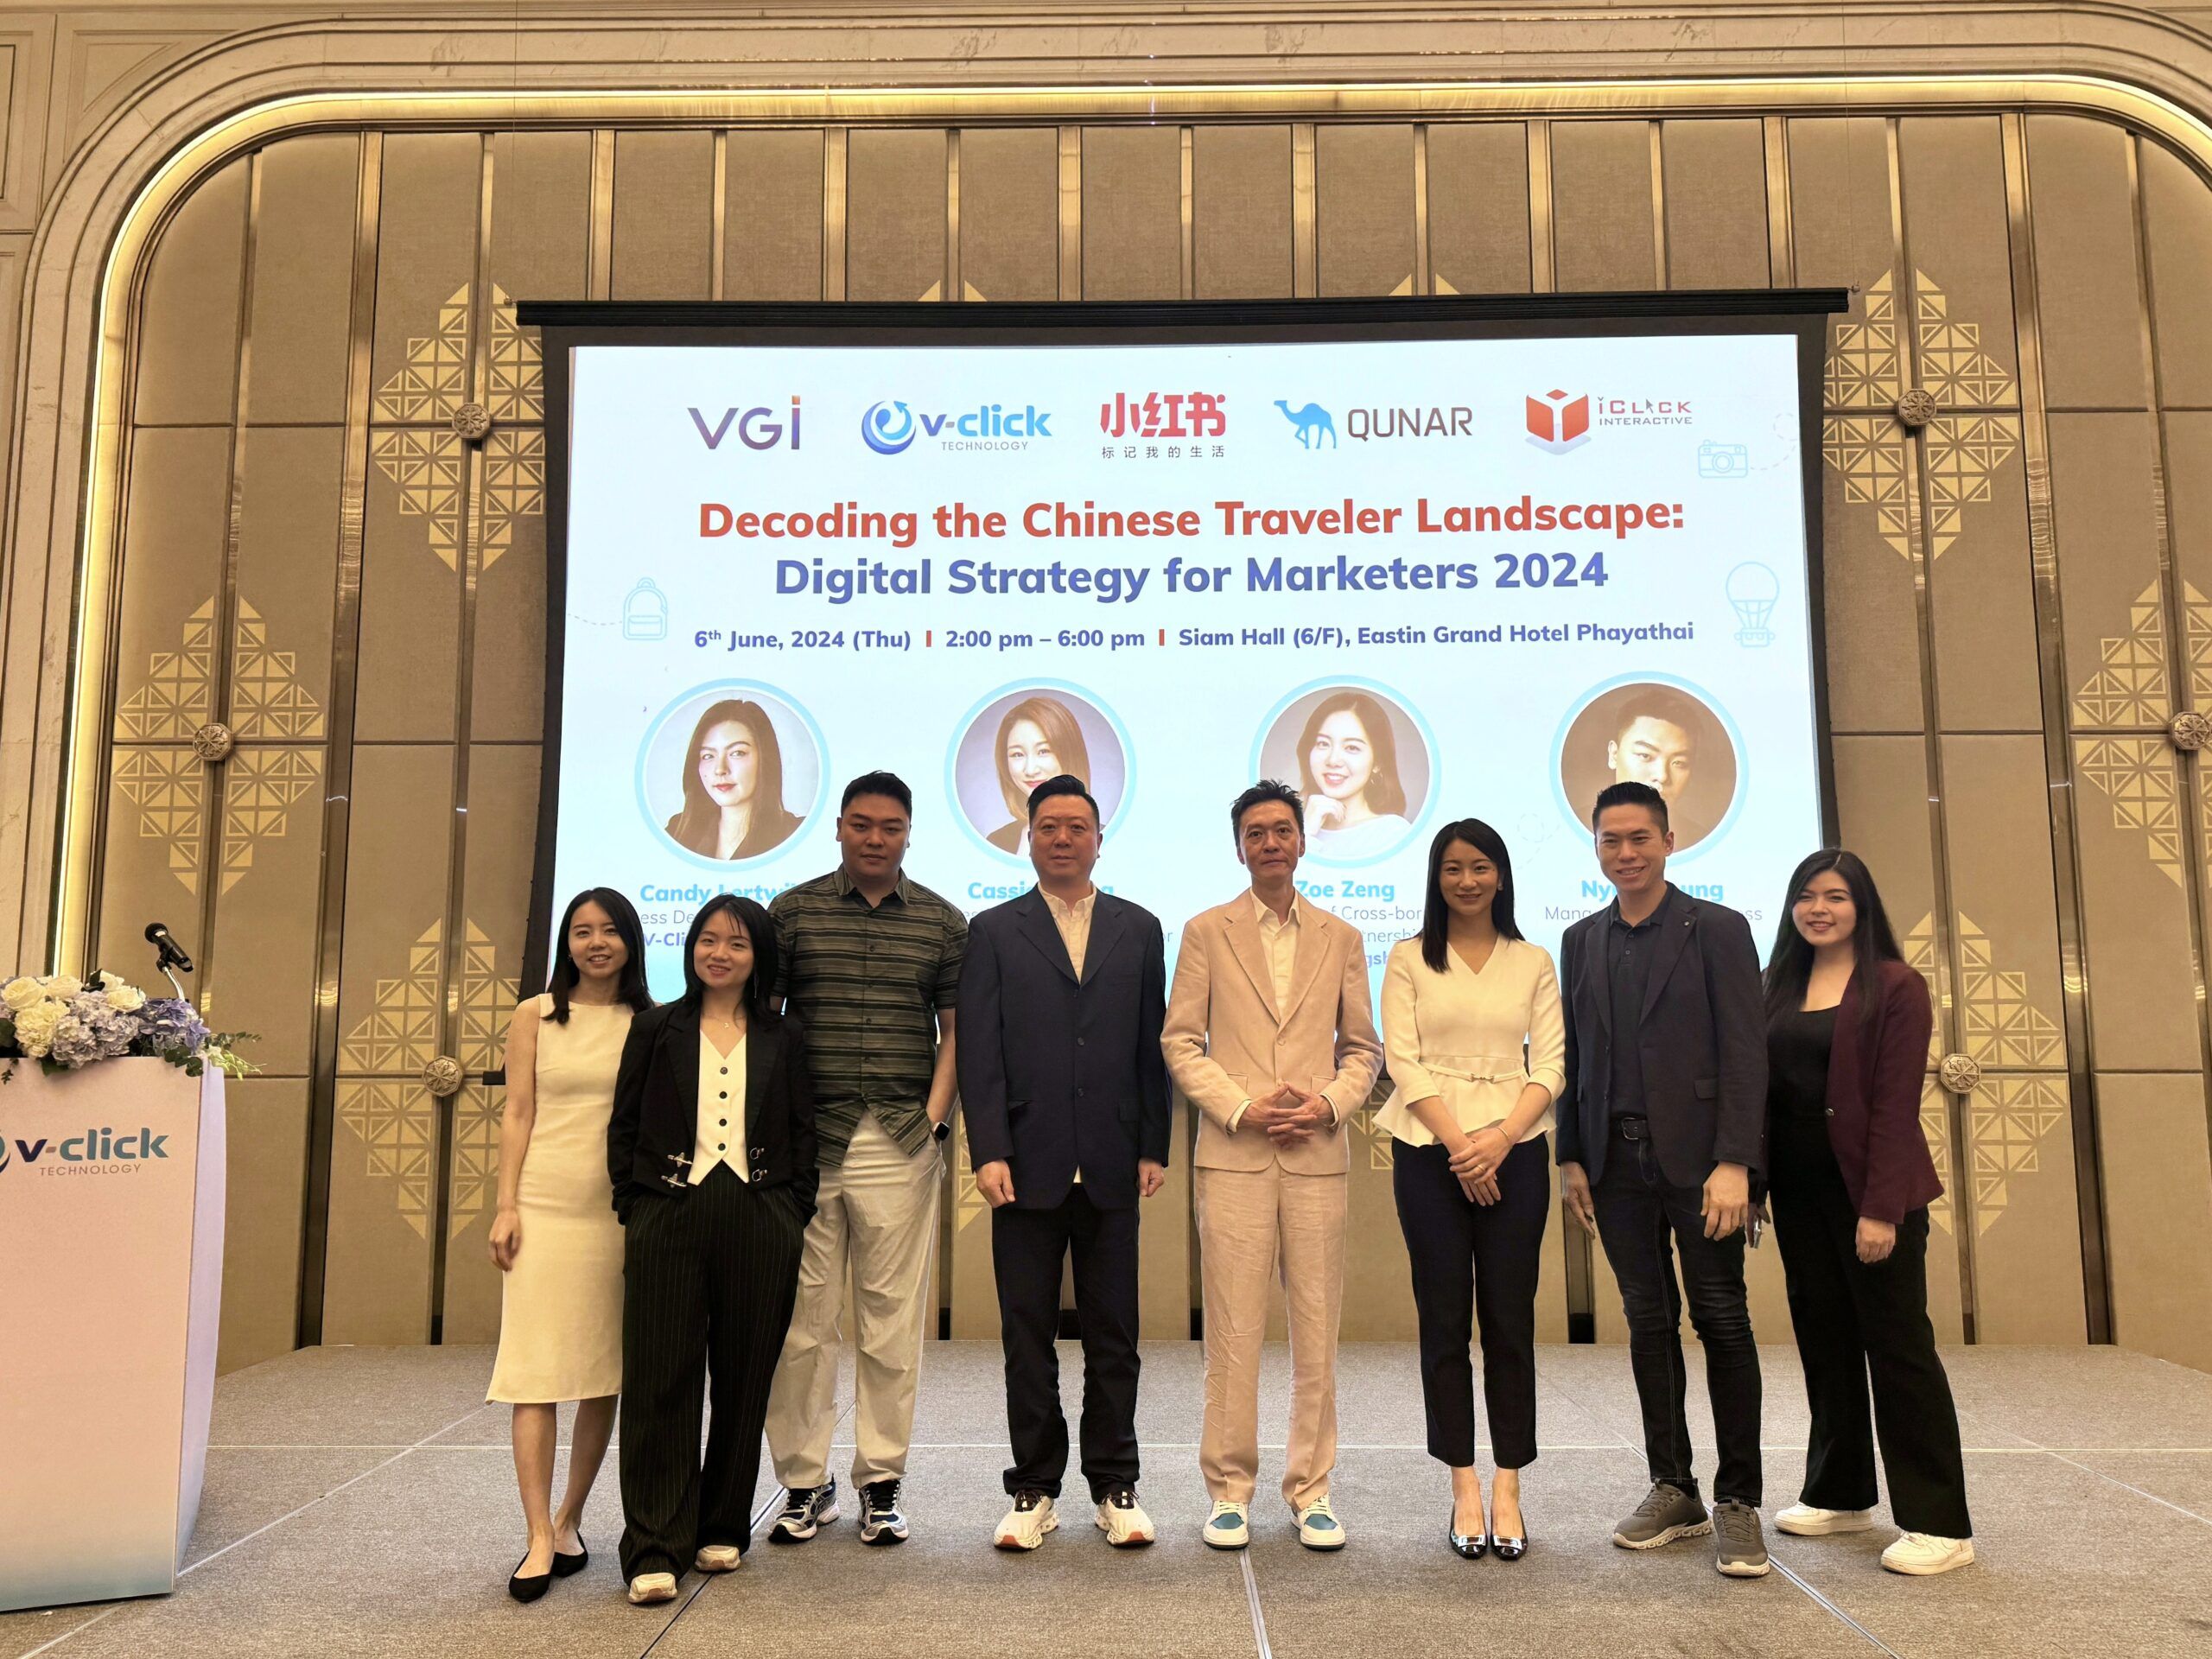 Successful Conclusion of the “Decoding the Chinese Traveler Landscape: Digital Strategy for Marketers 2024” Conference in Bangkok